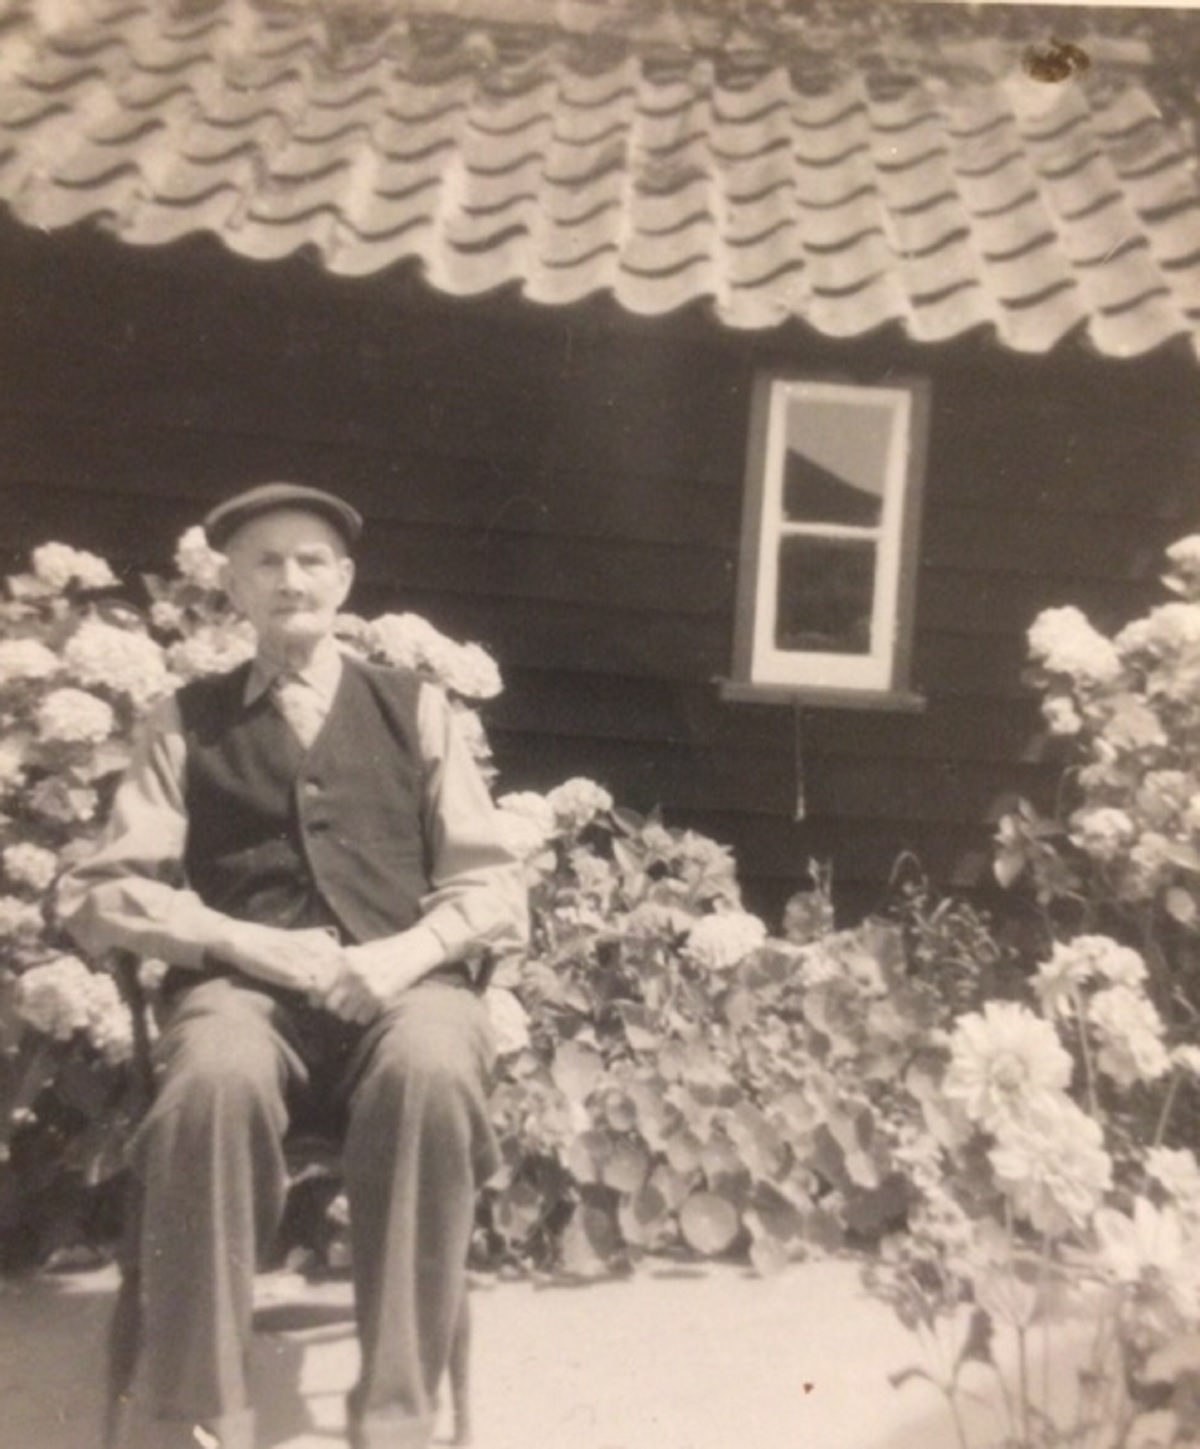 Snapshot into the past - Alfred Button, taken at Rose Cottage in the late 1960s when he was in his 90s